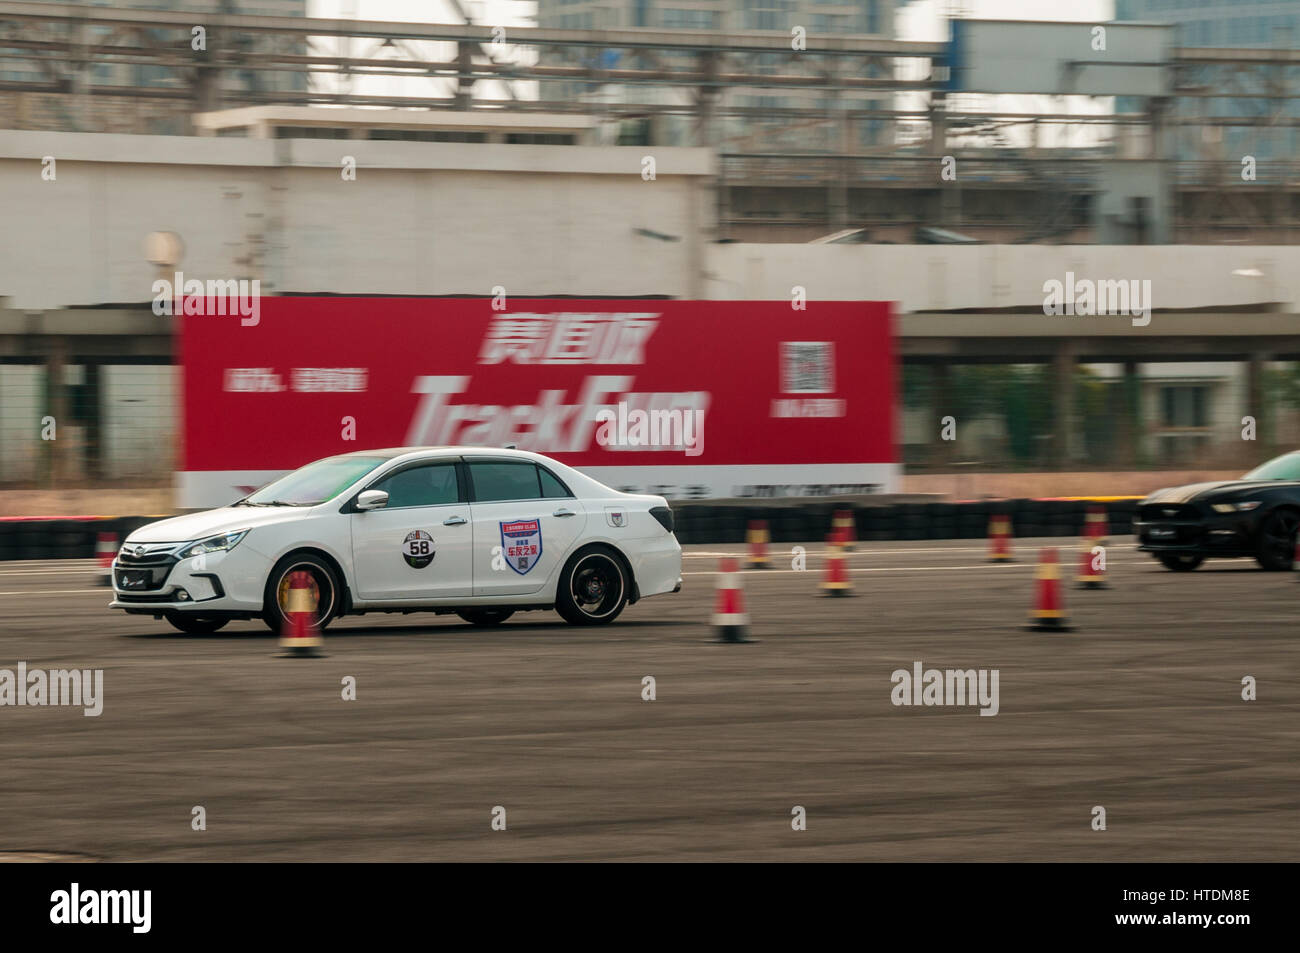 Shanghai, China. 11th March 2017. Drag racing event at Shanghai's old Expo site organised by fast4ward and iWagon. A BYD Qin out runs a Mustang in the drag race. Credit: Mark Andrews/Alamy Live News Stock Photo